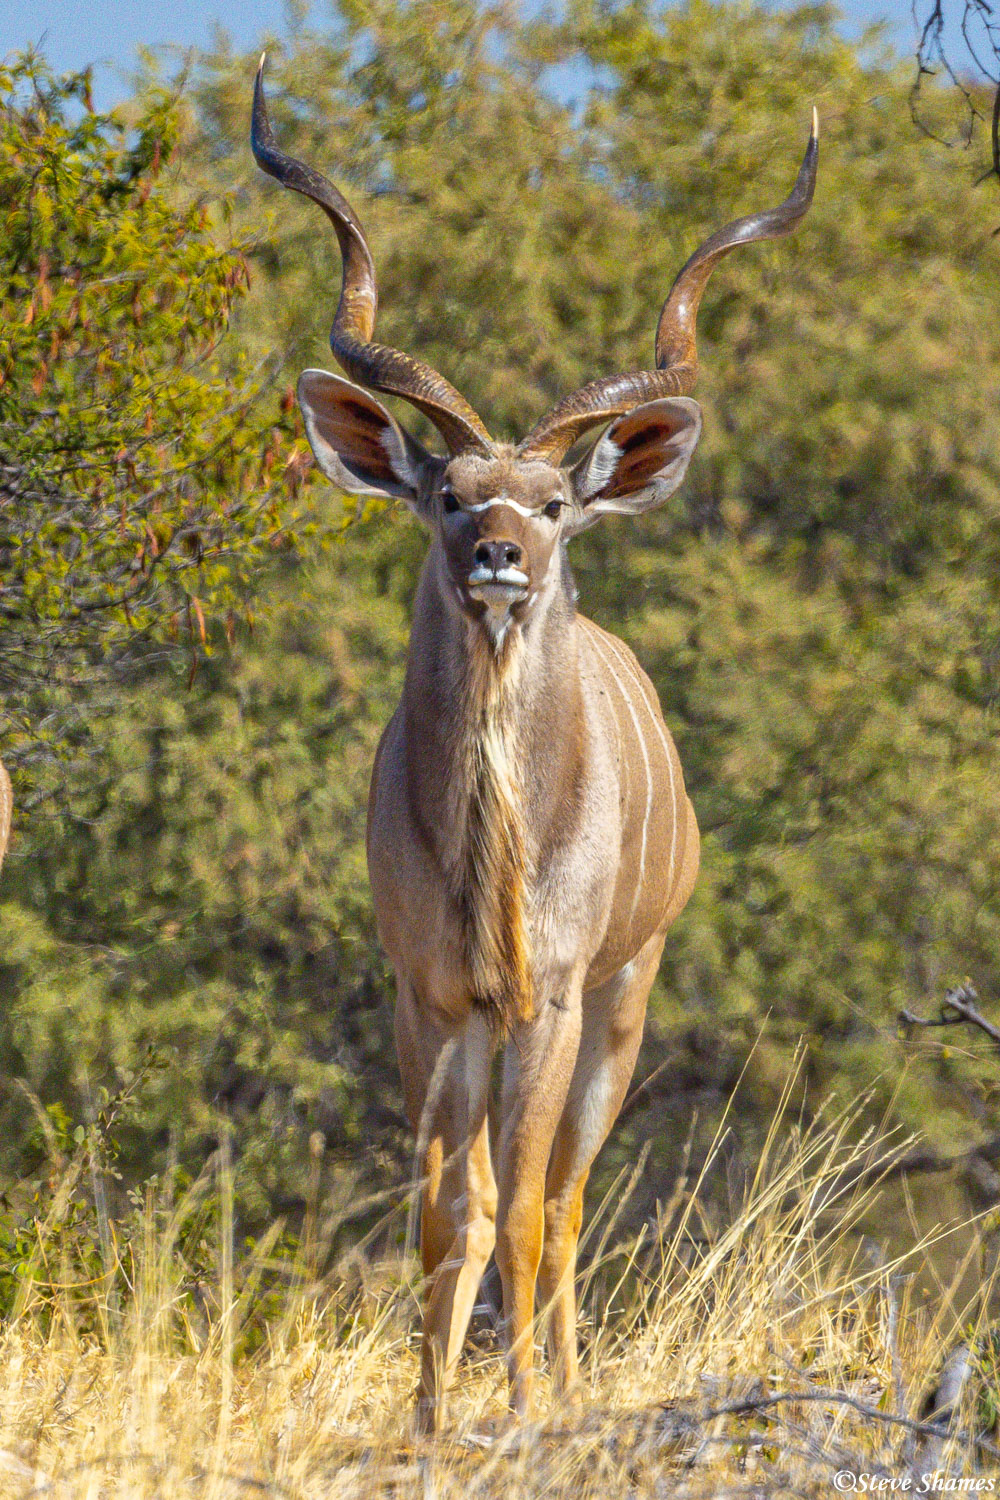 Here is a male kudu with some very long horns.